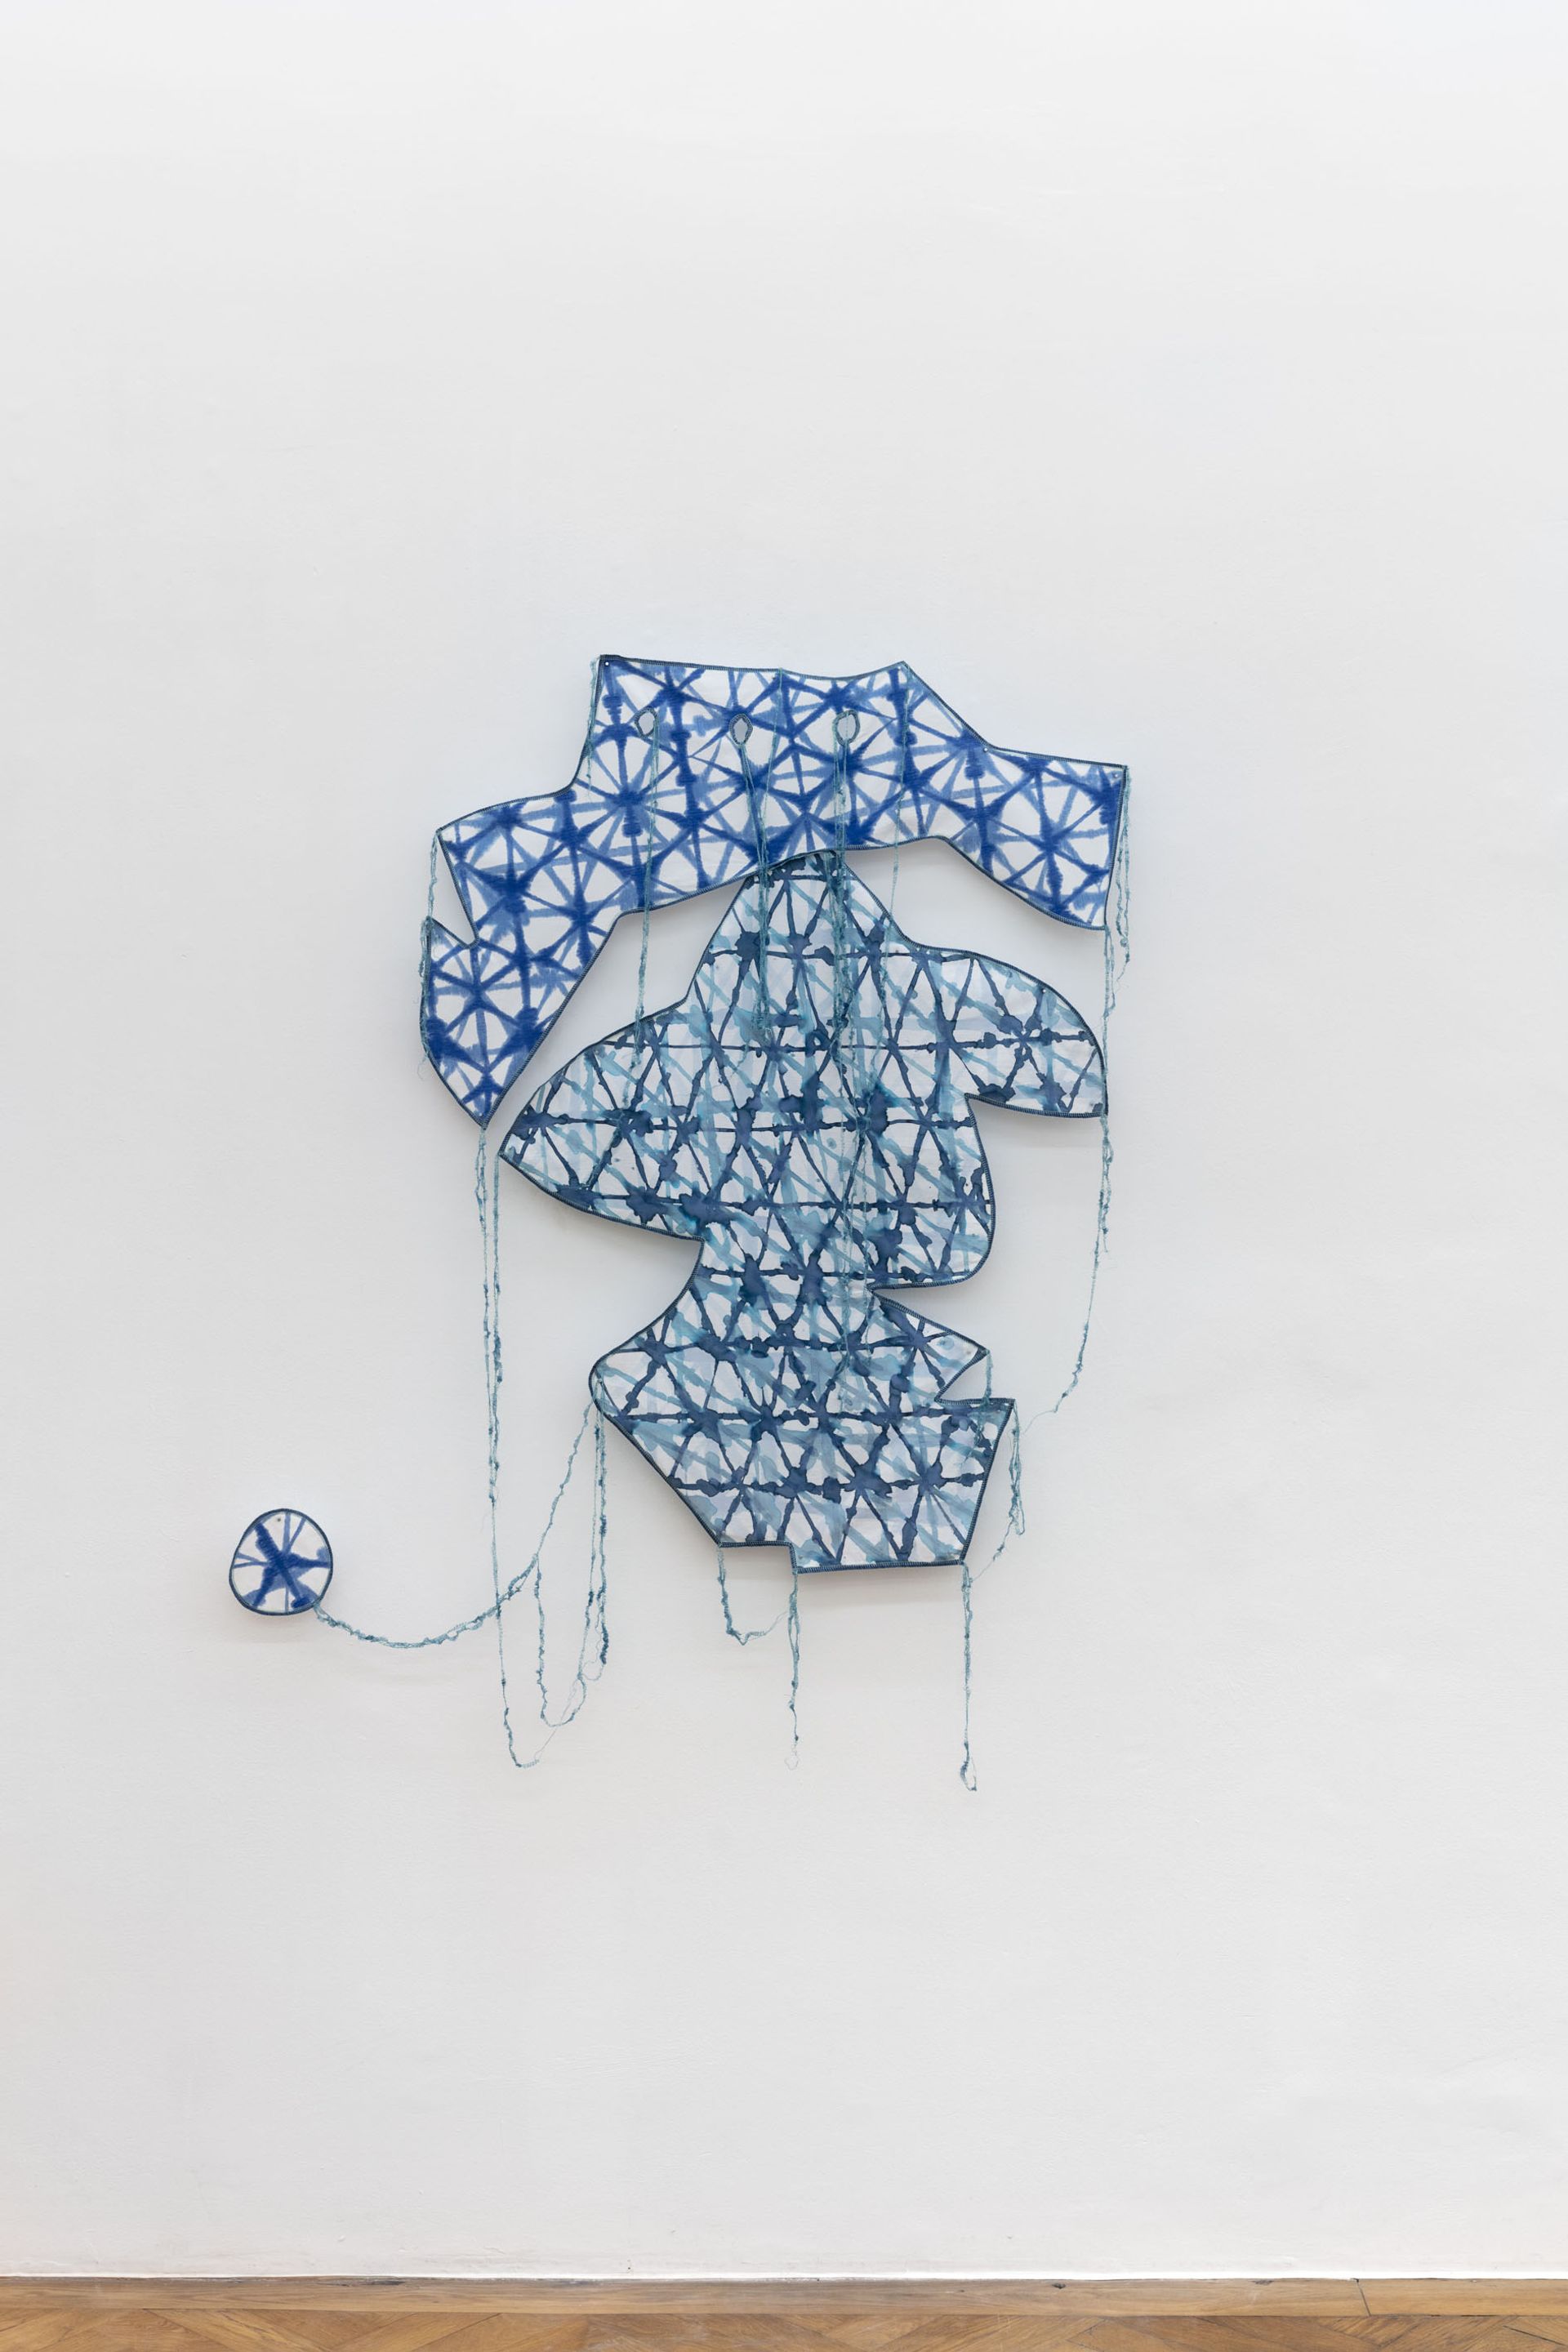 Ana Navas, Passant mit Zylinder, 2021, Industrial textiles and copies of the patterns painted by hand, silkscreen print, 116 × 116 cm